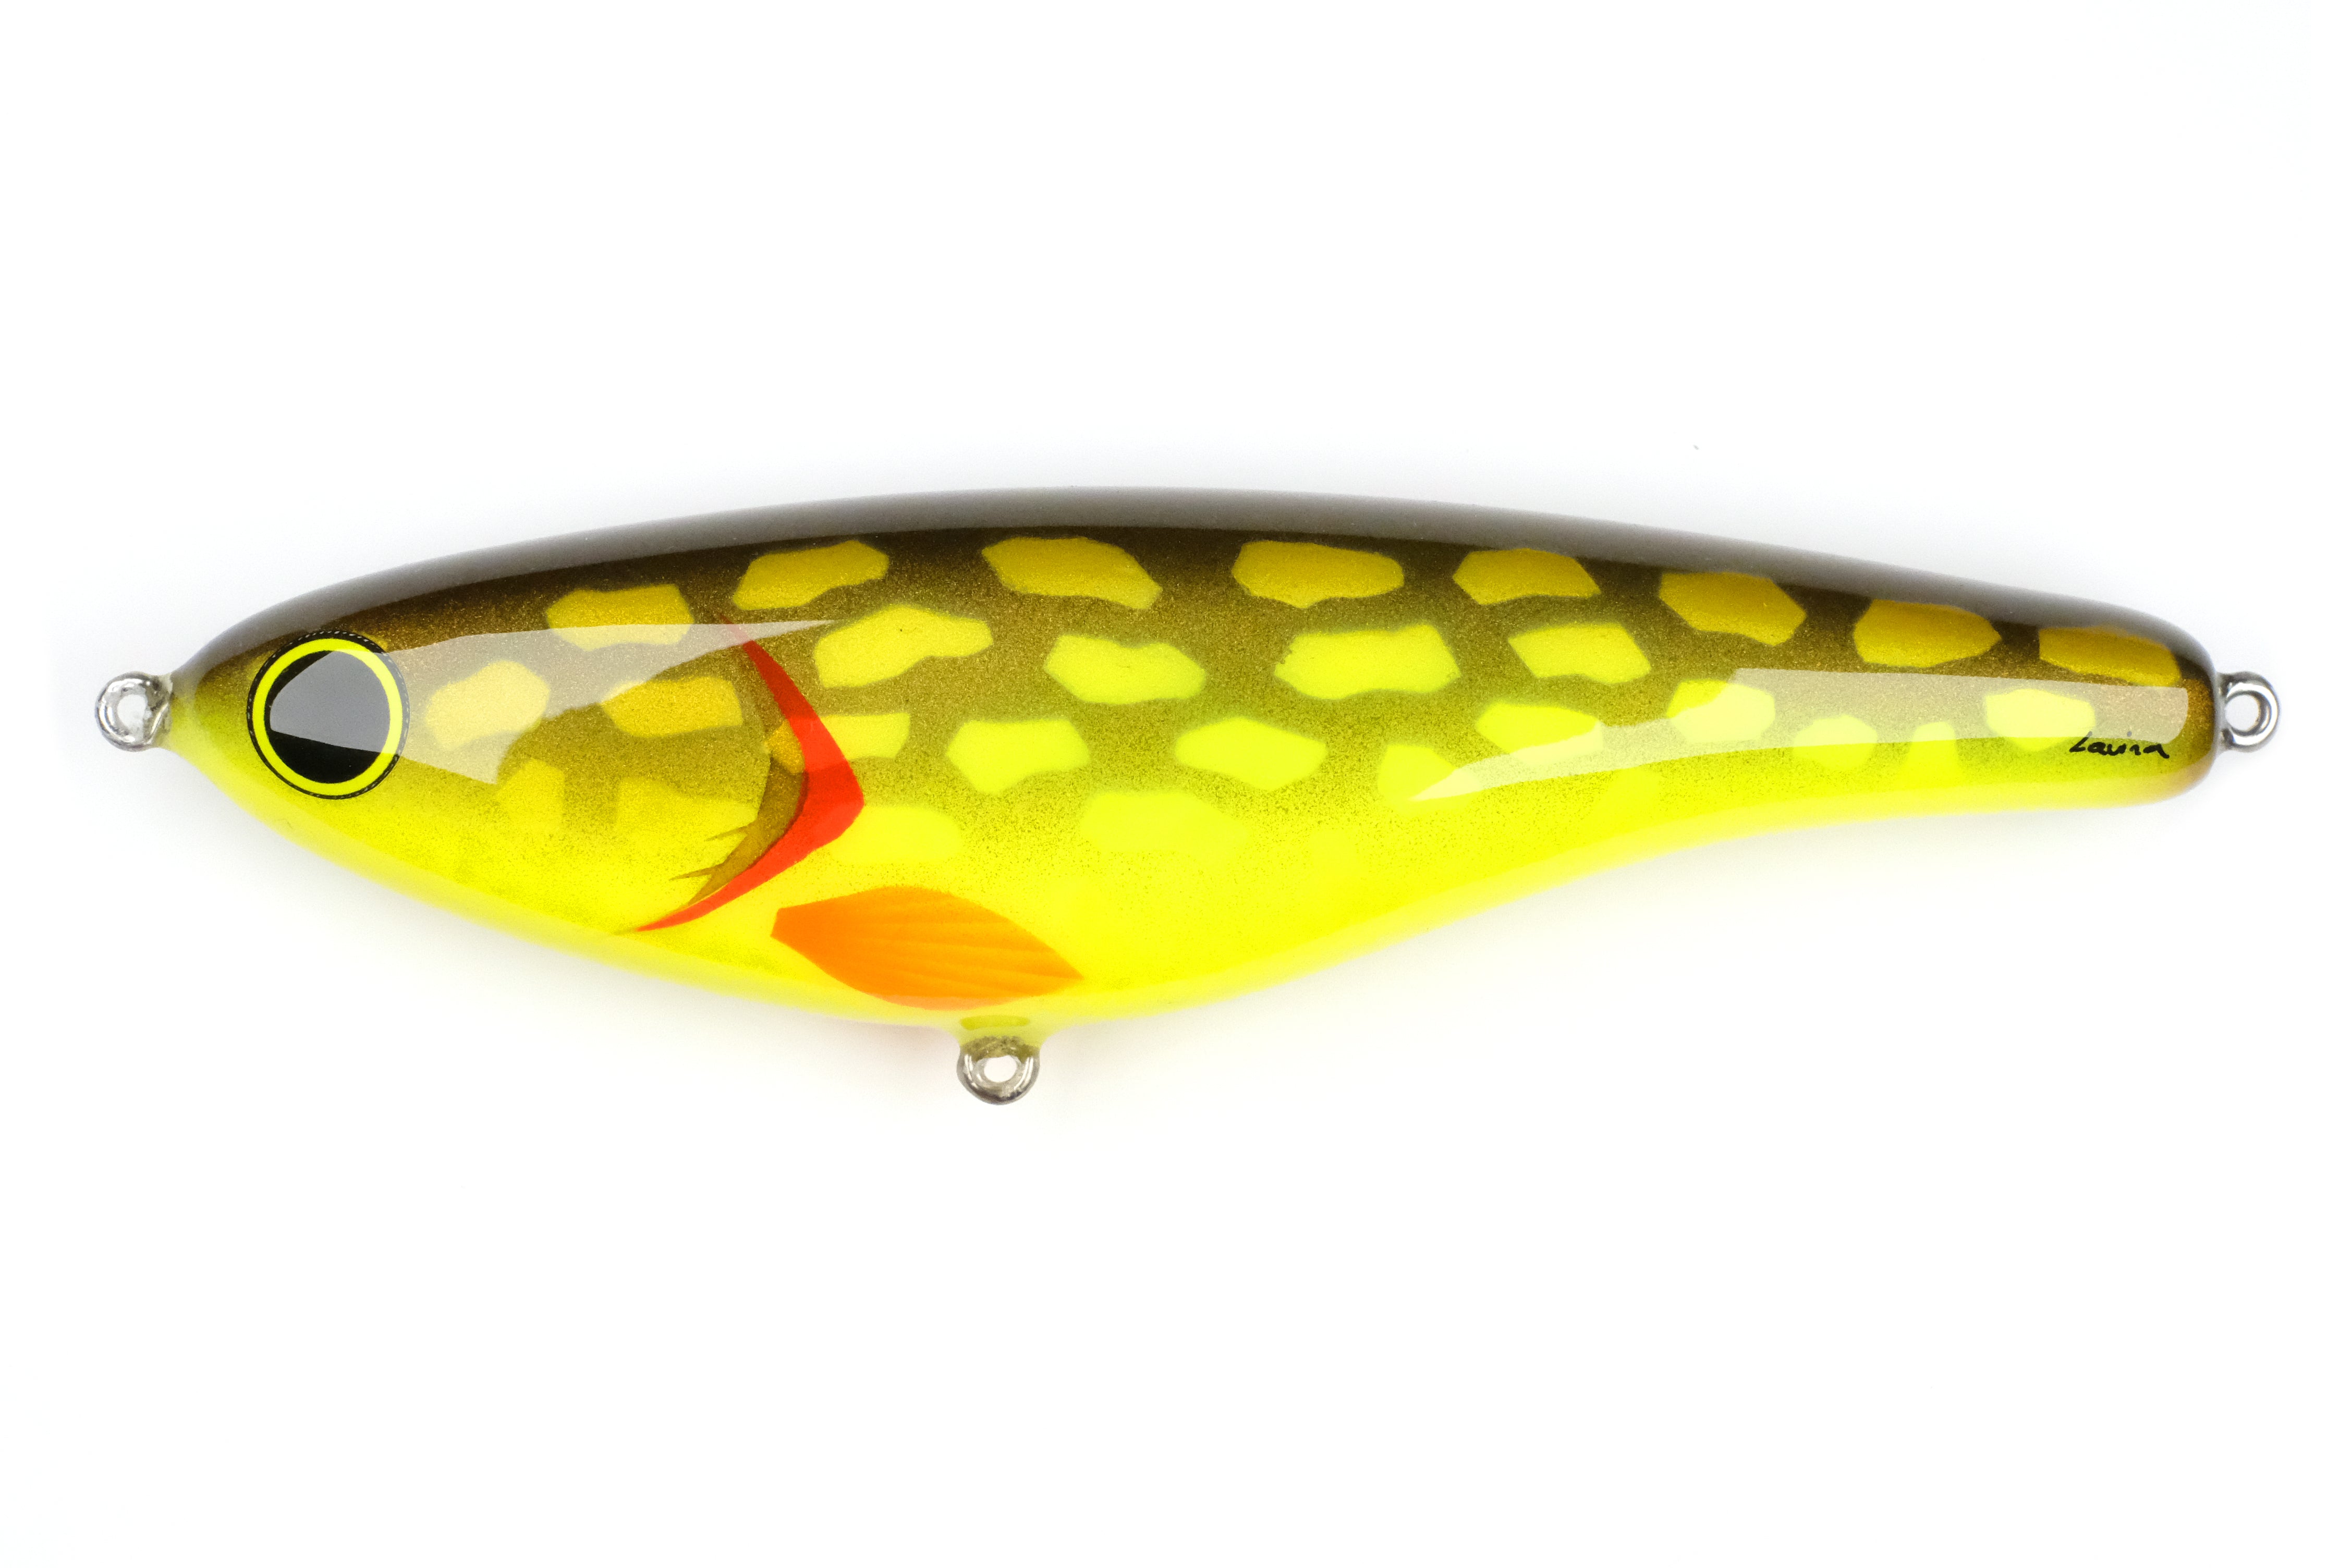 Lavina 165mm Fluo Yellow Pike